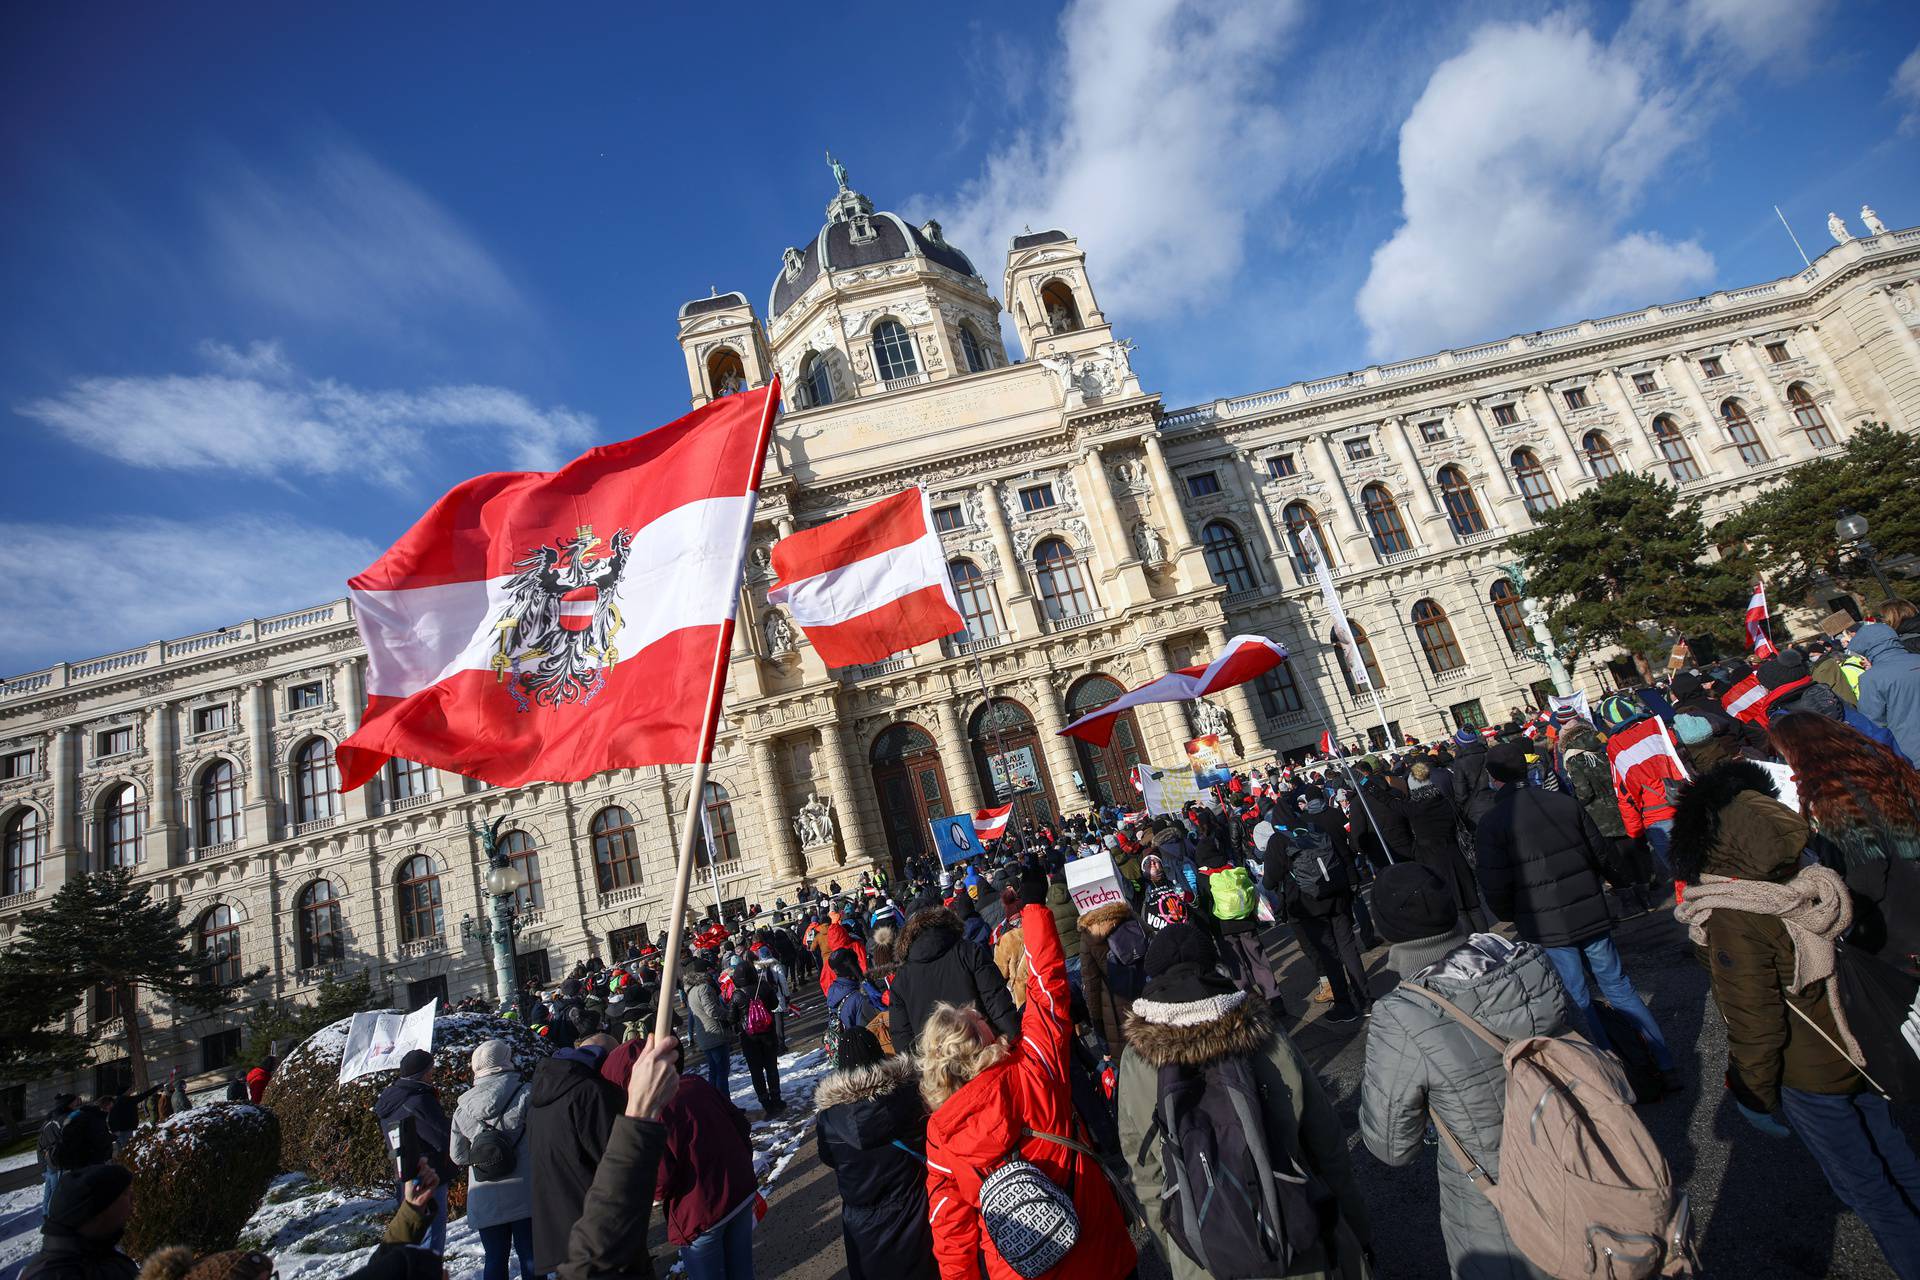 Demonstration against the COVID-19 measures and their economic consequences, in Vienna